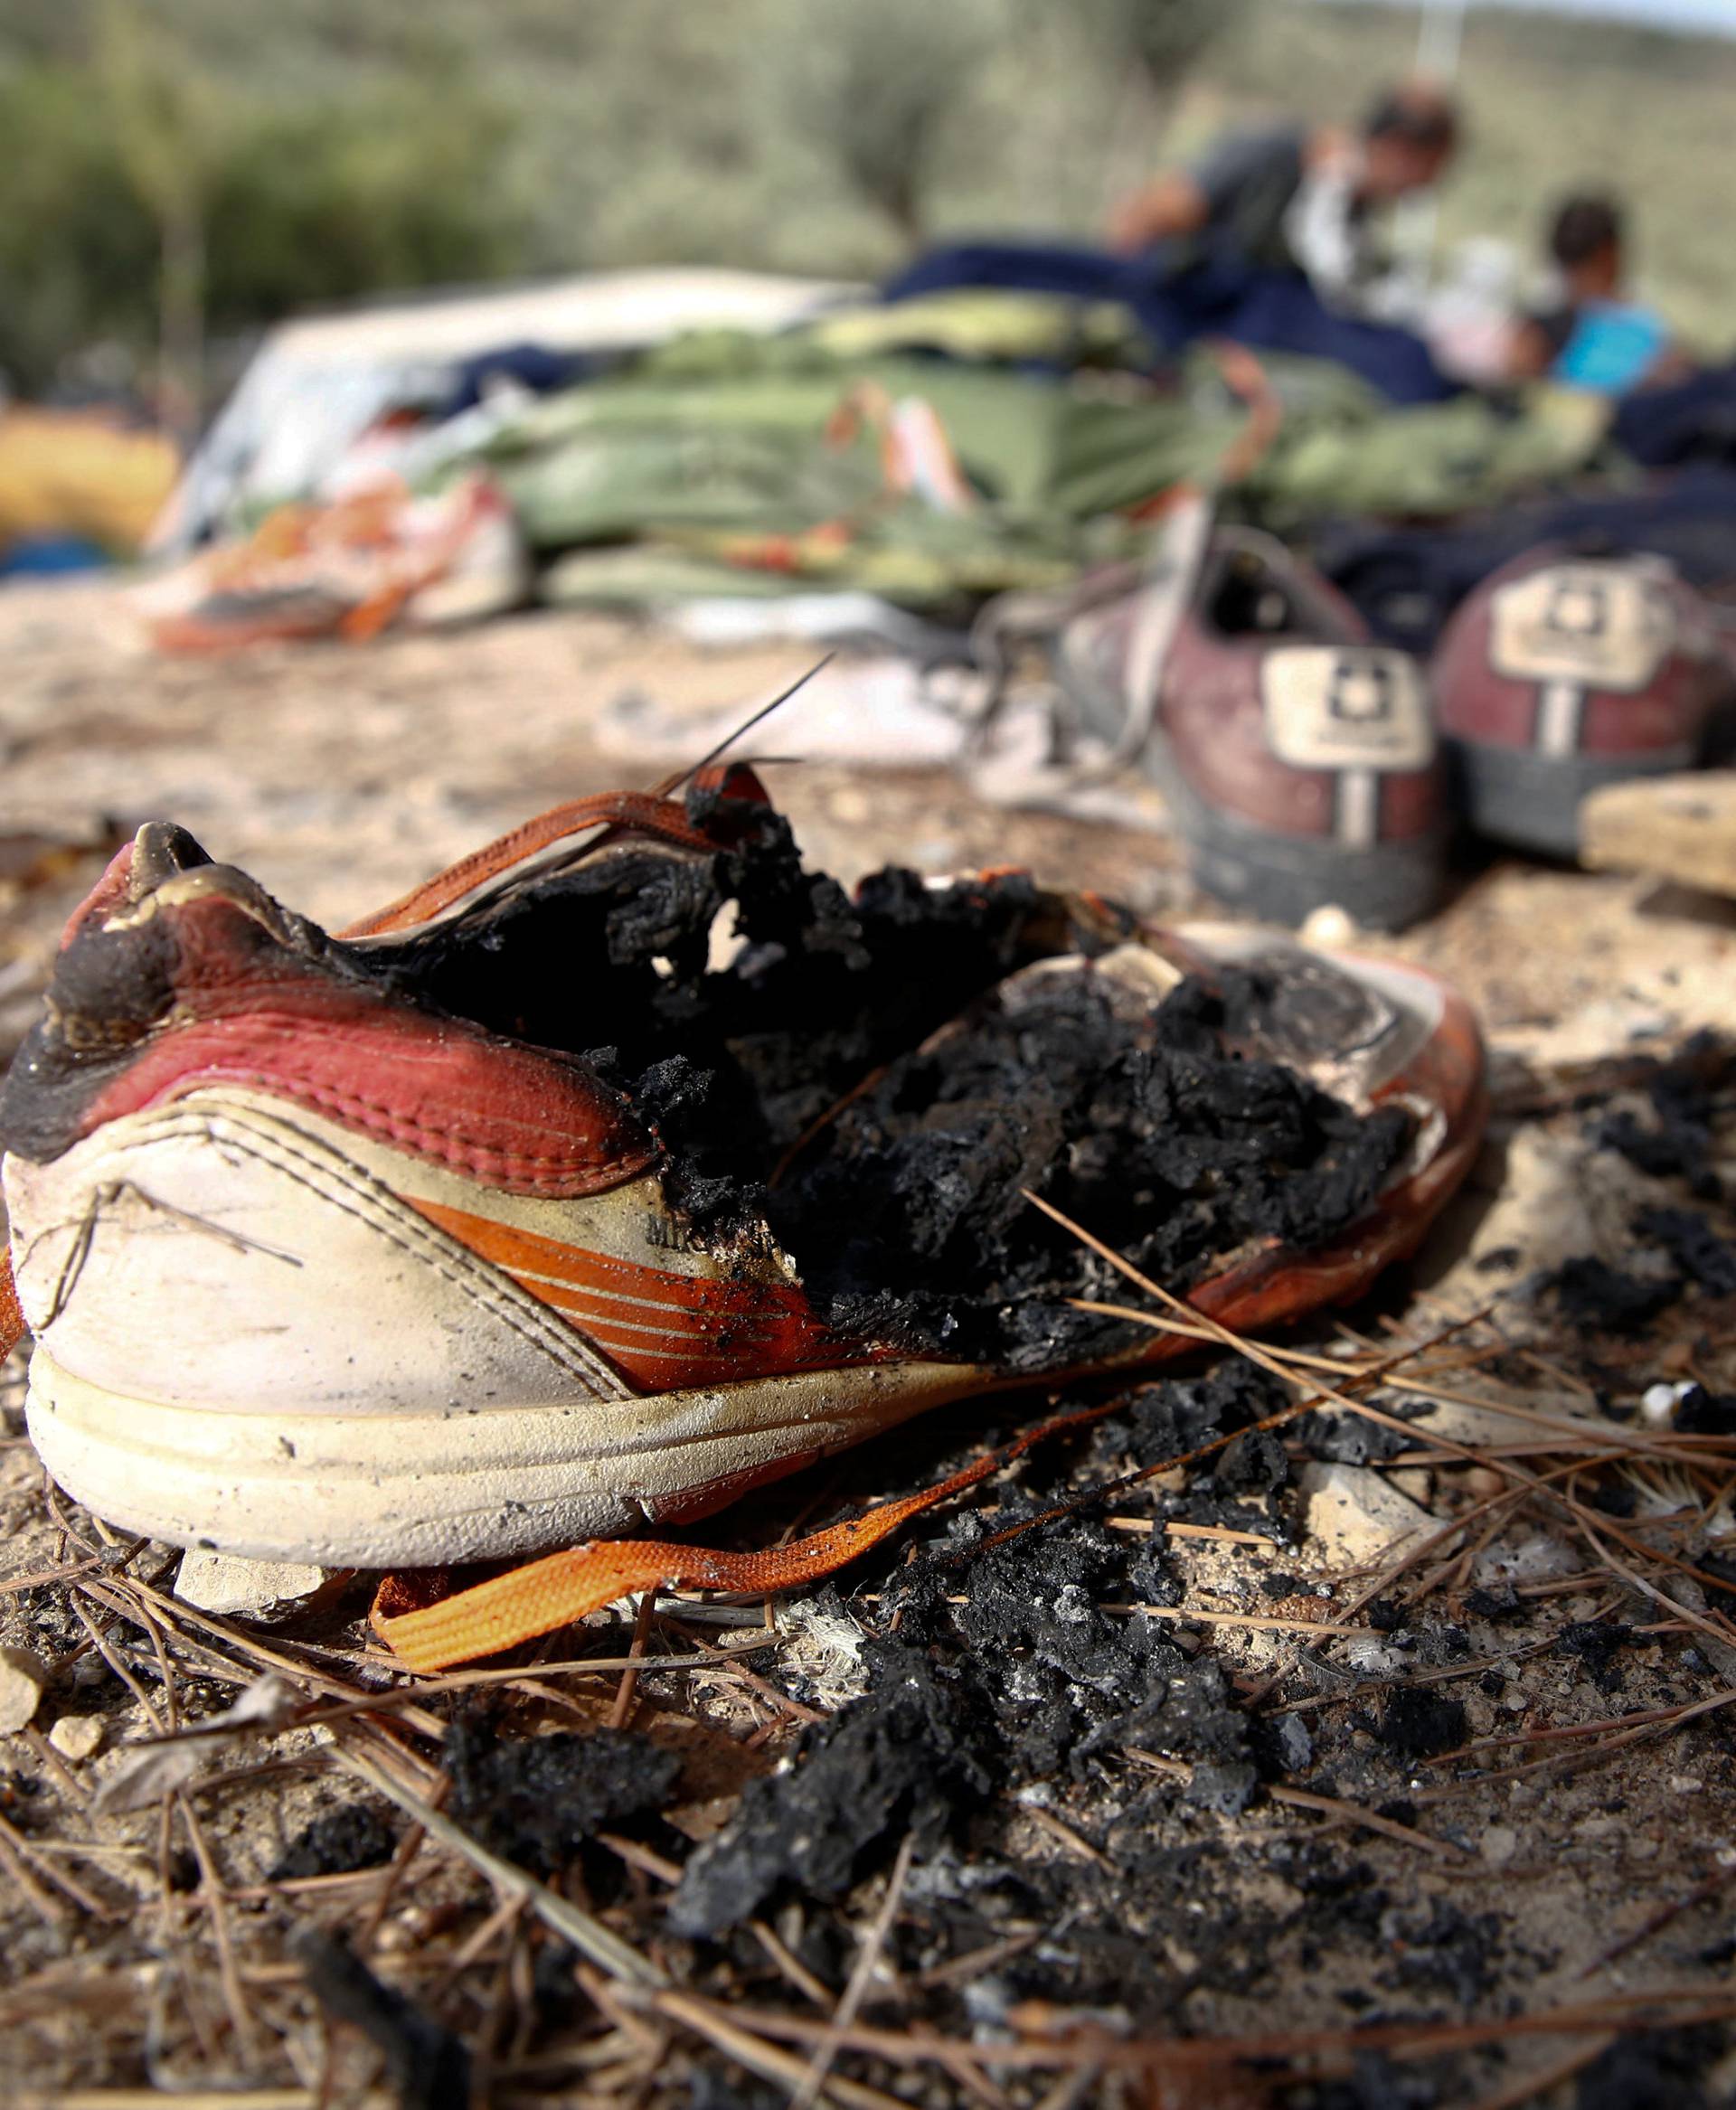 A burned shoe is seen on the ground, after a fire that ripped through tents and destroyed containers during violence among residents, on the island of Lesbos